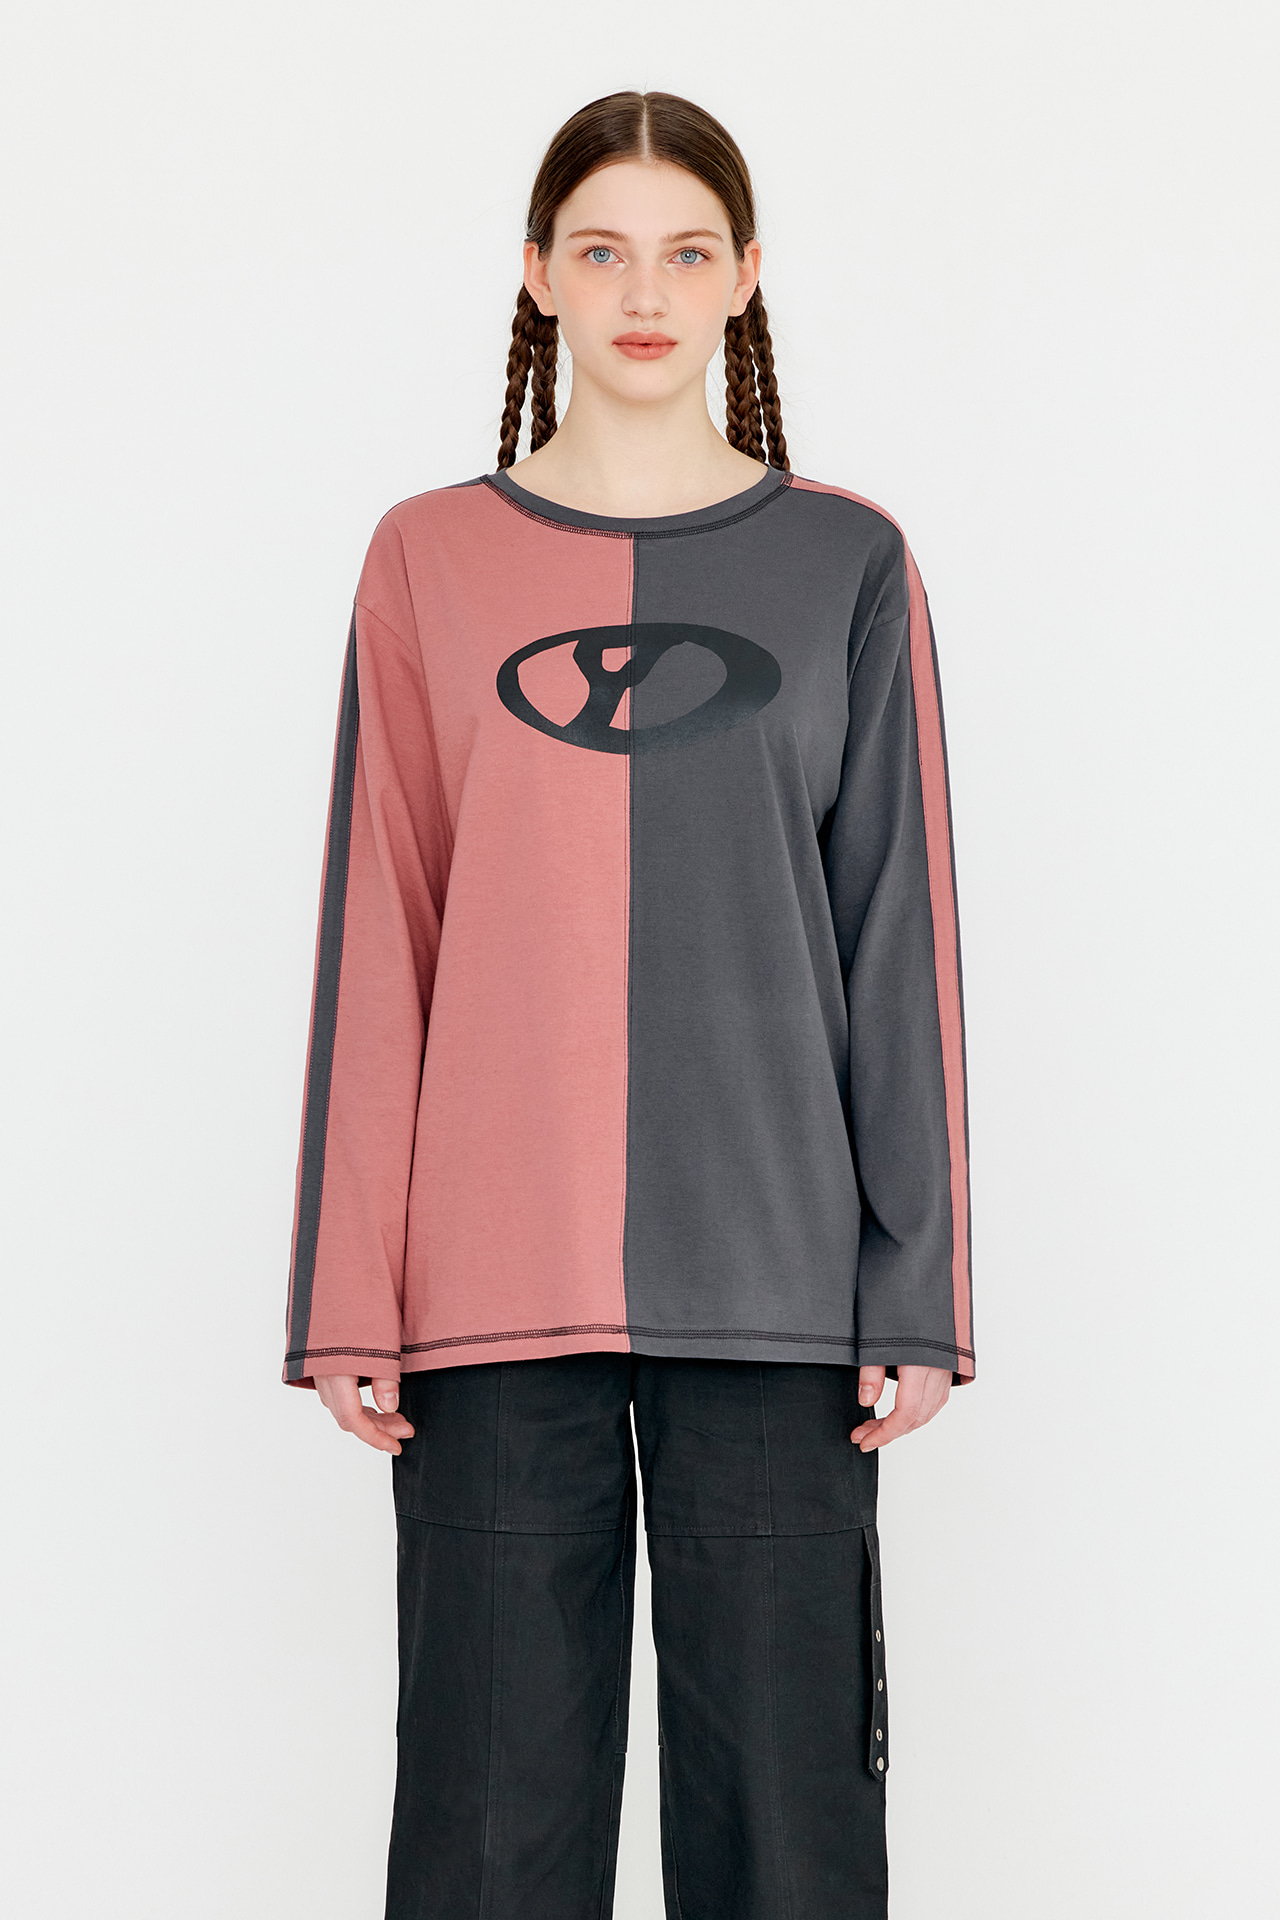 COLOR BLOCK GRAPHIC T-SHIRT - PINK + GRAY